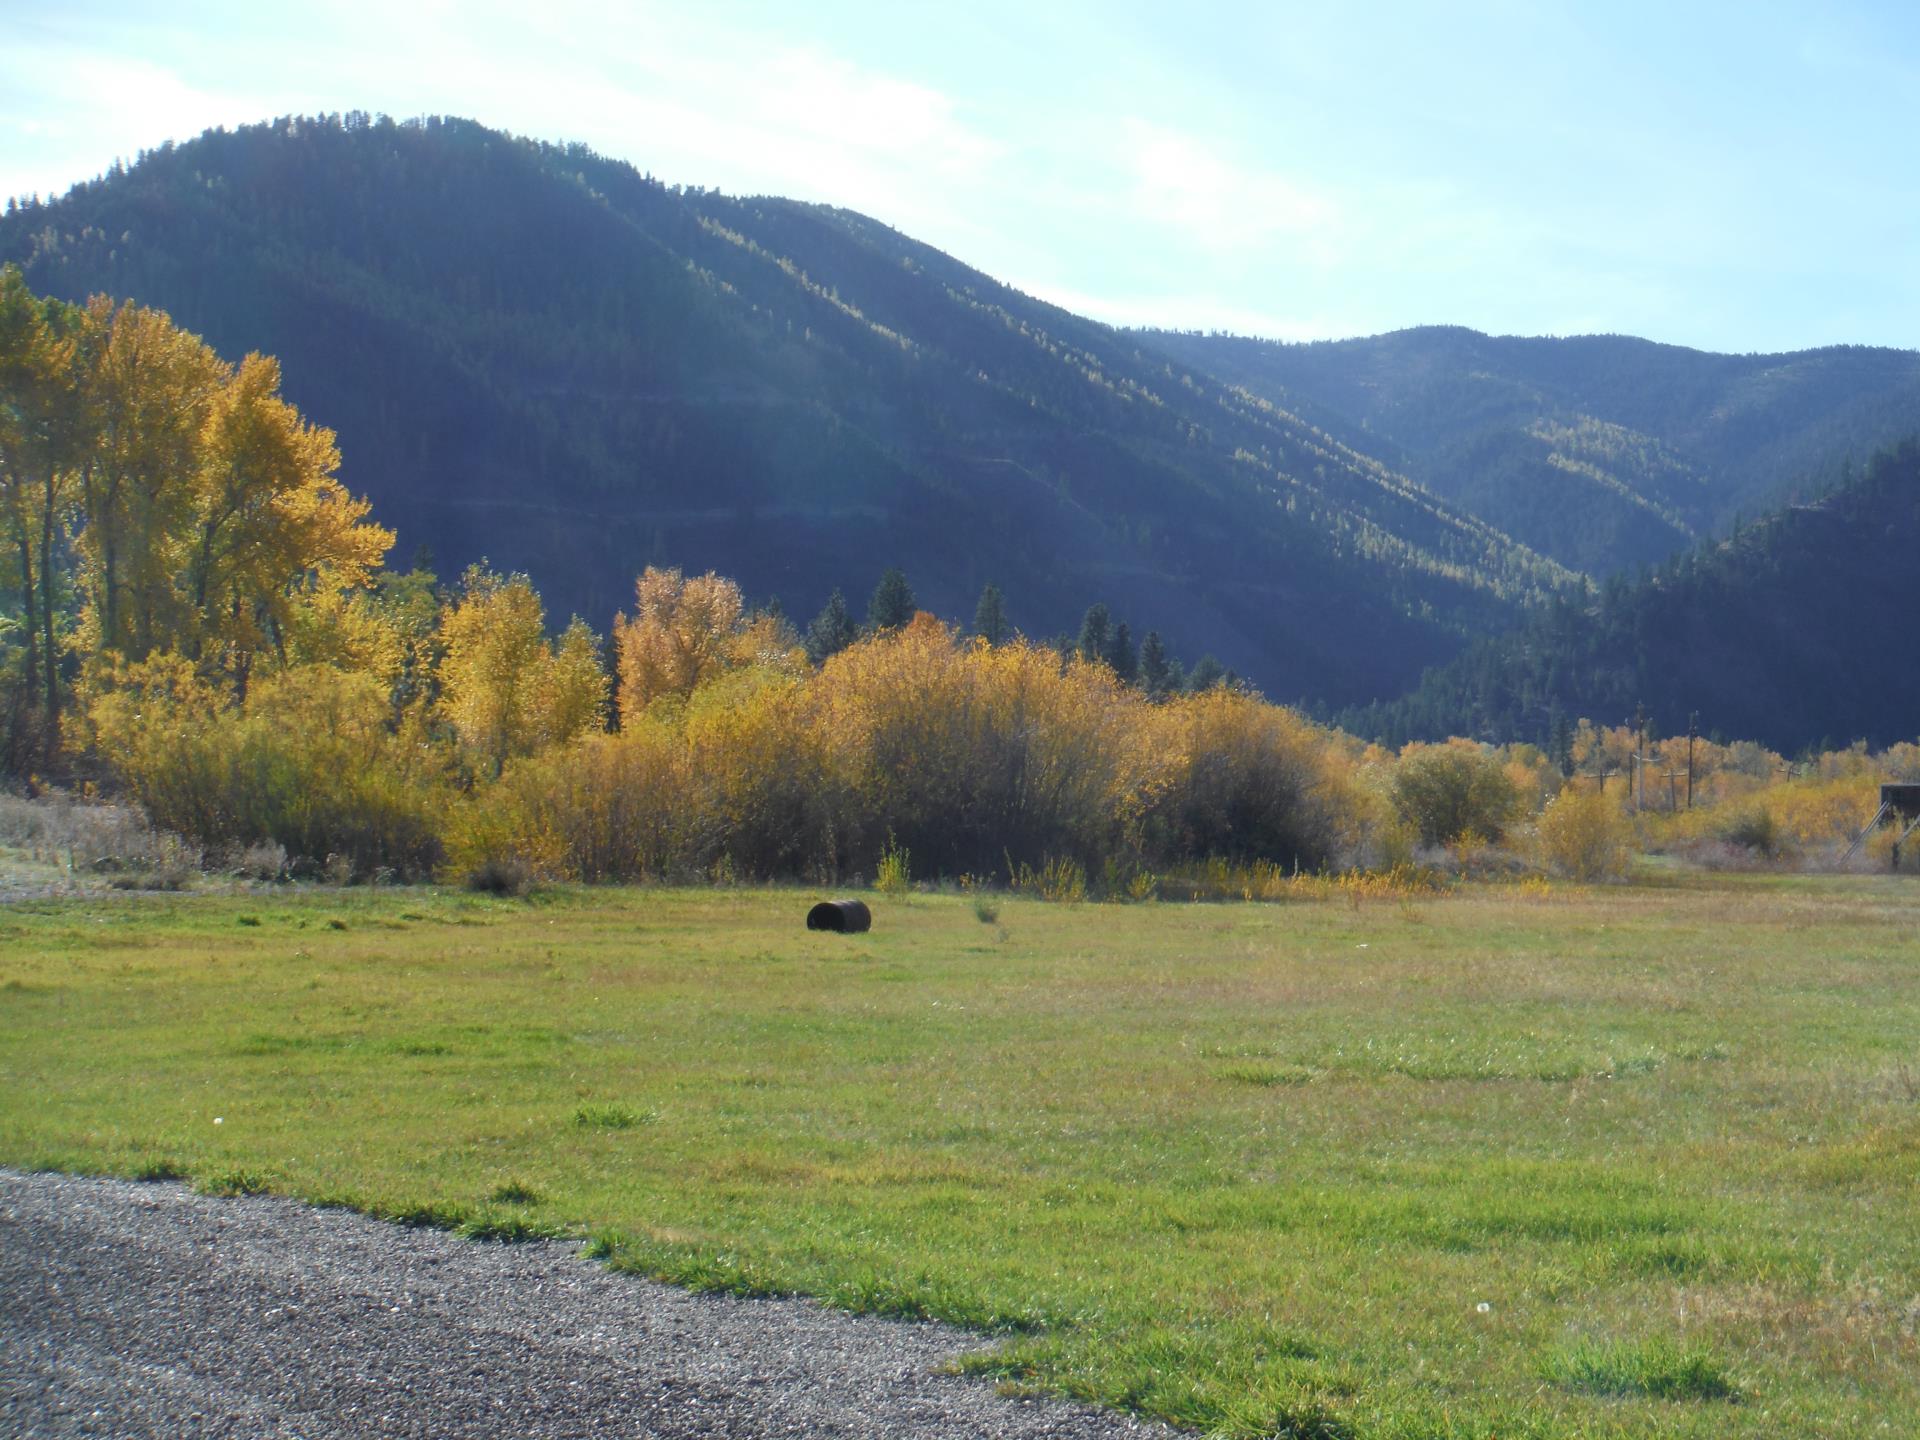 Healthy Environment of Missoula County mountainous valley